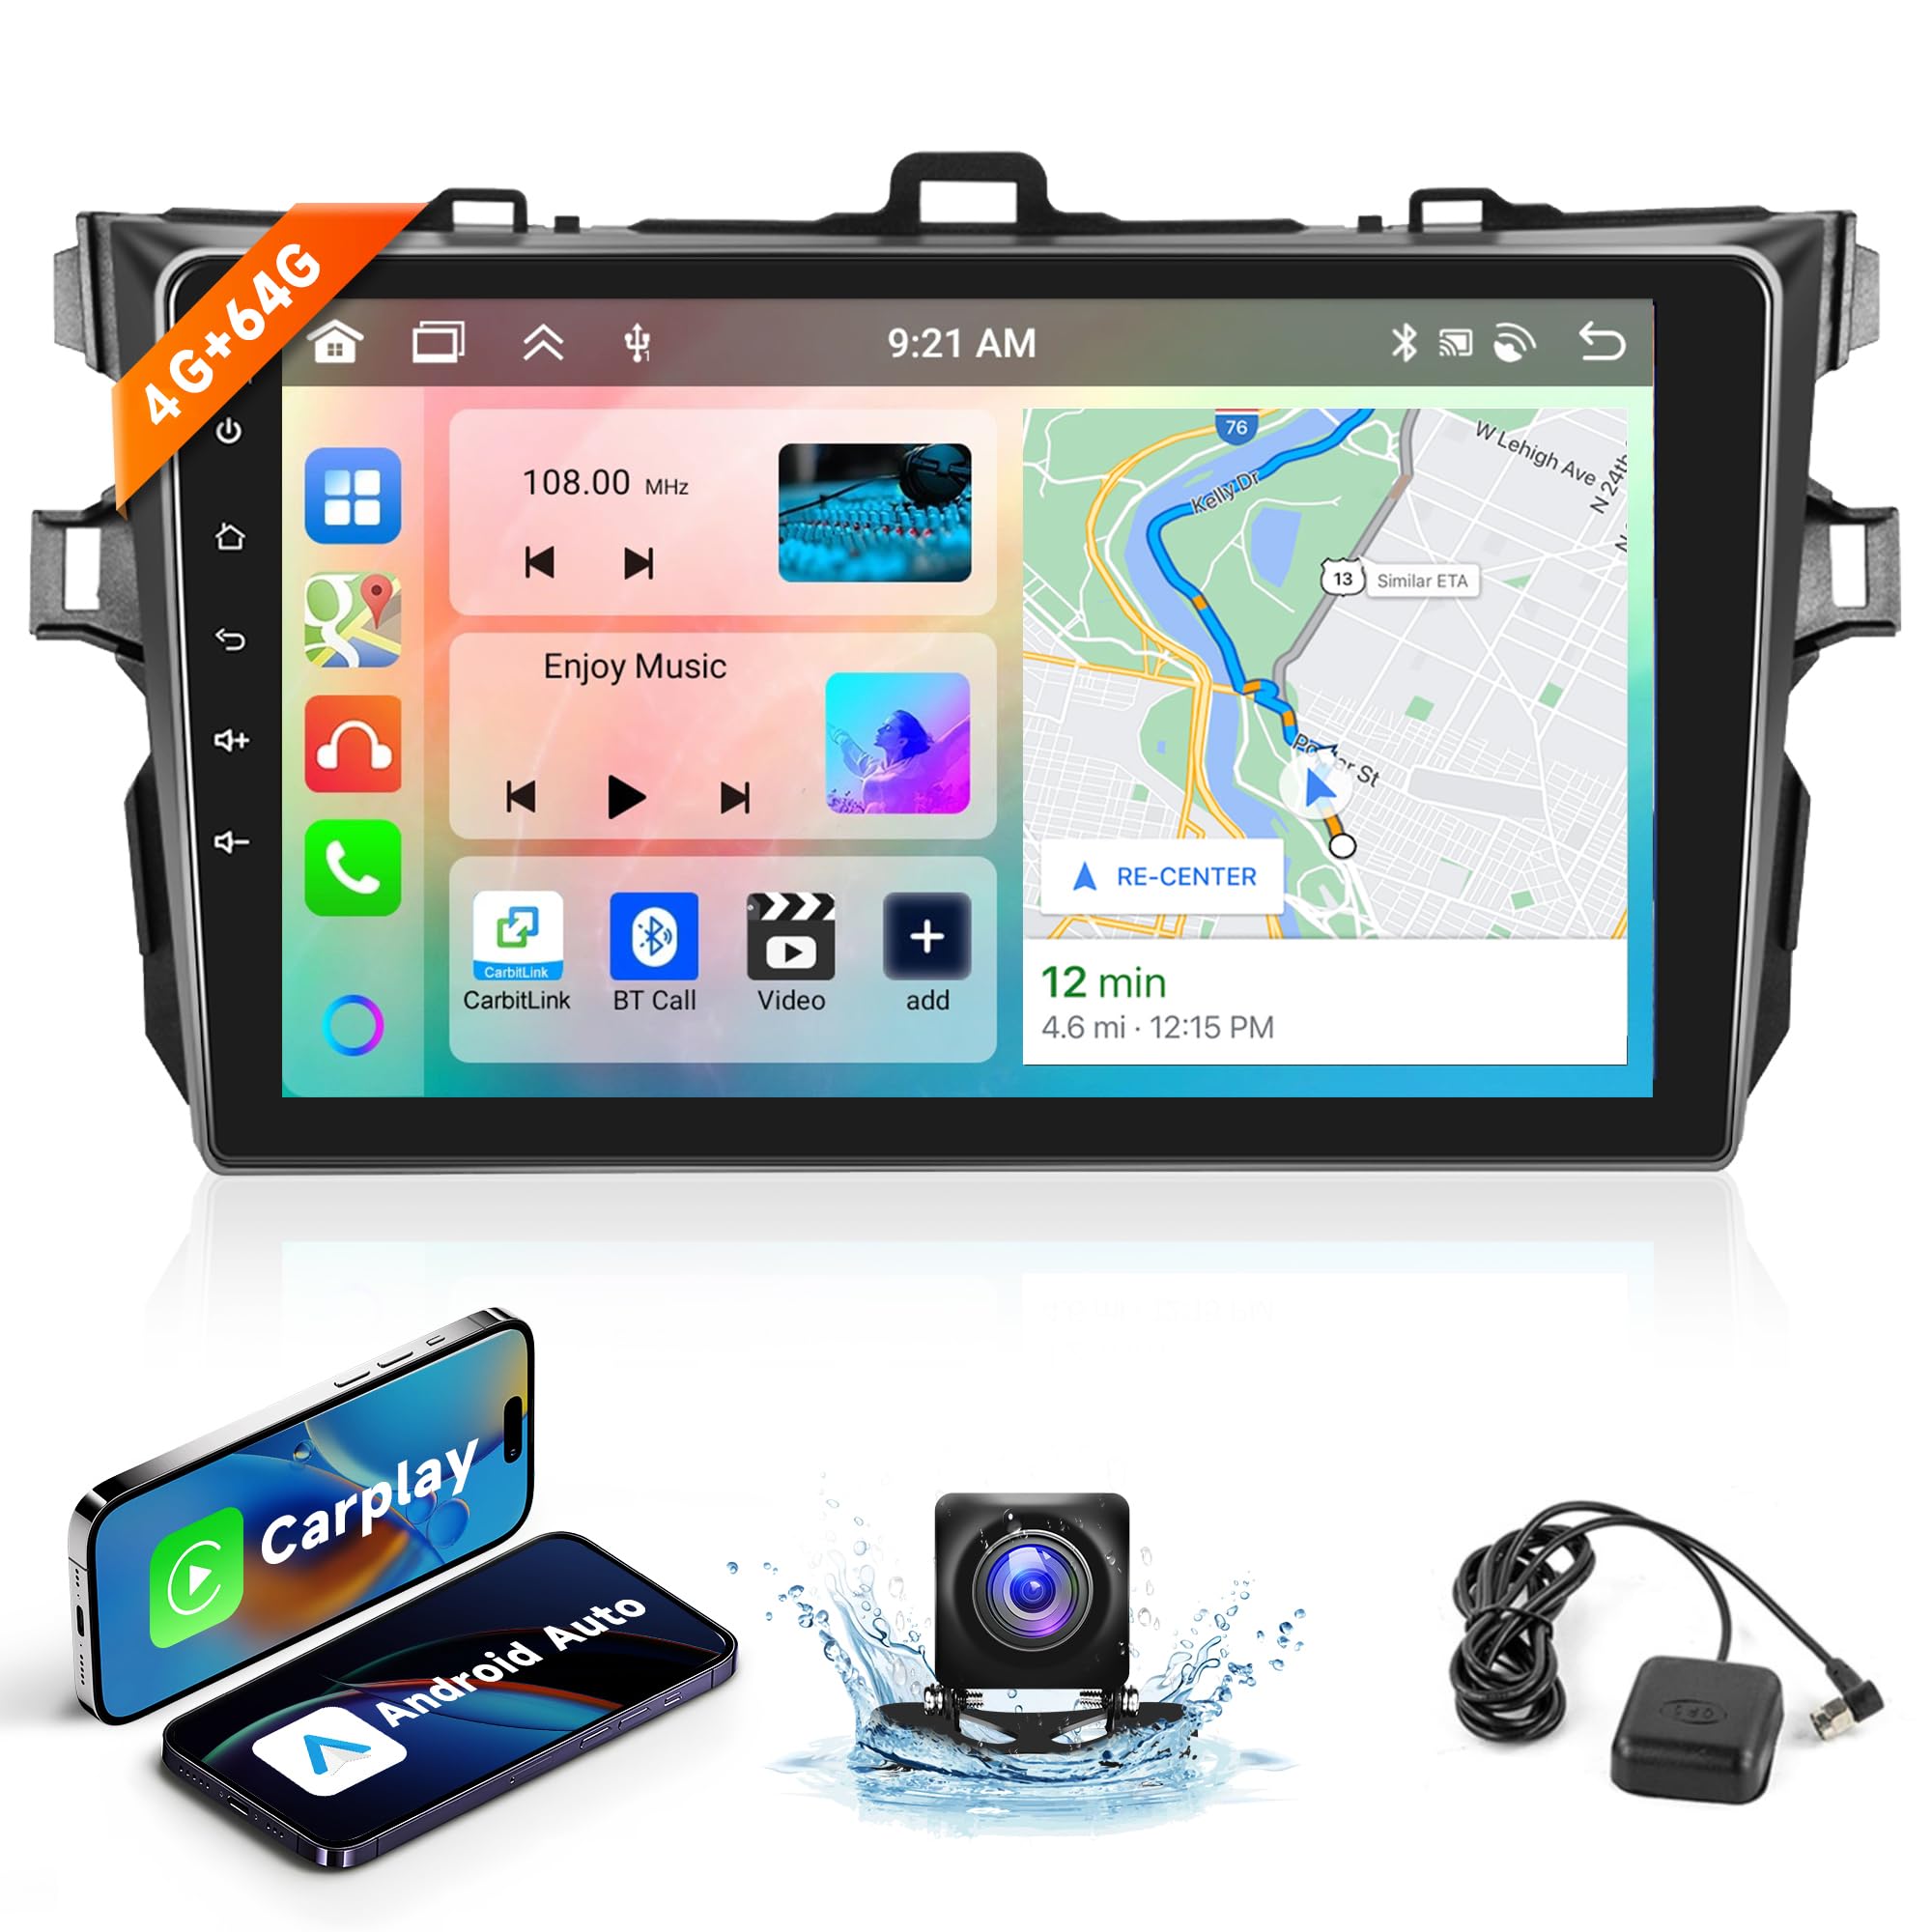 8 Core 4G 64G Android Car Stereo for Toyota Corolla 2006-2012 with